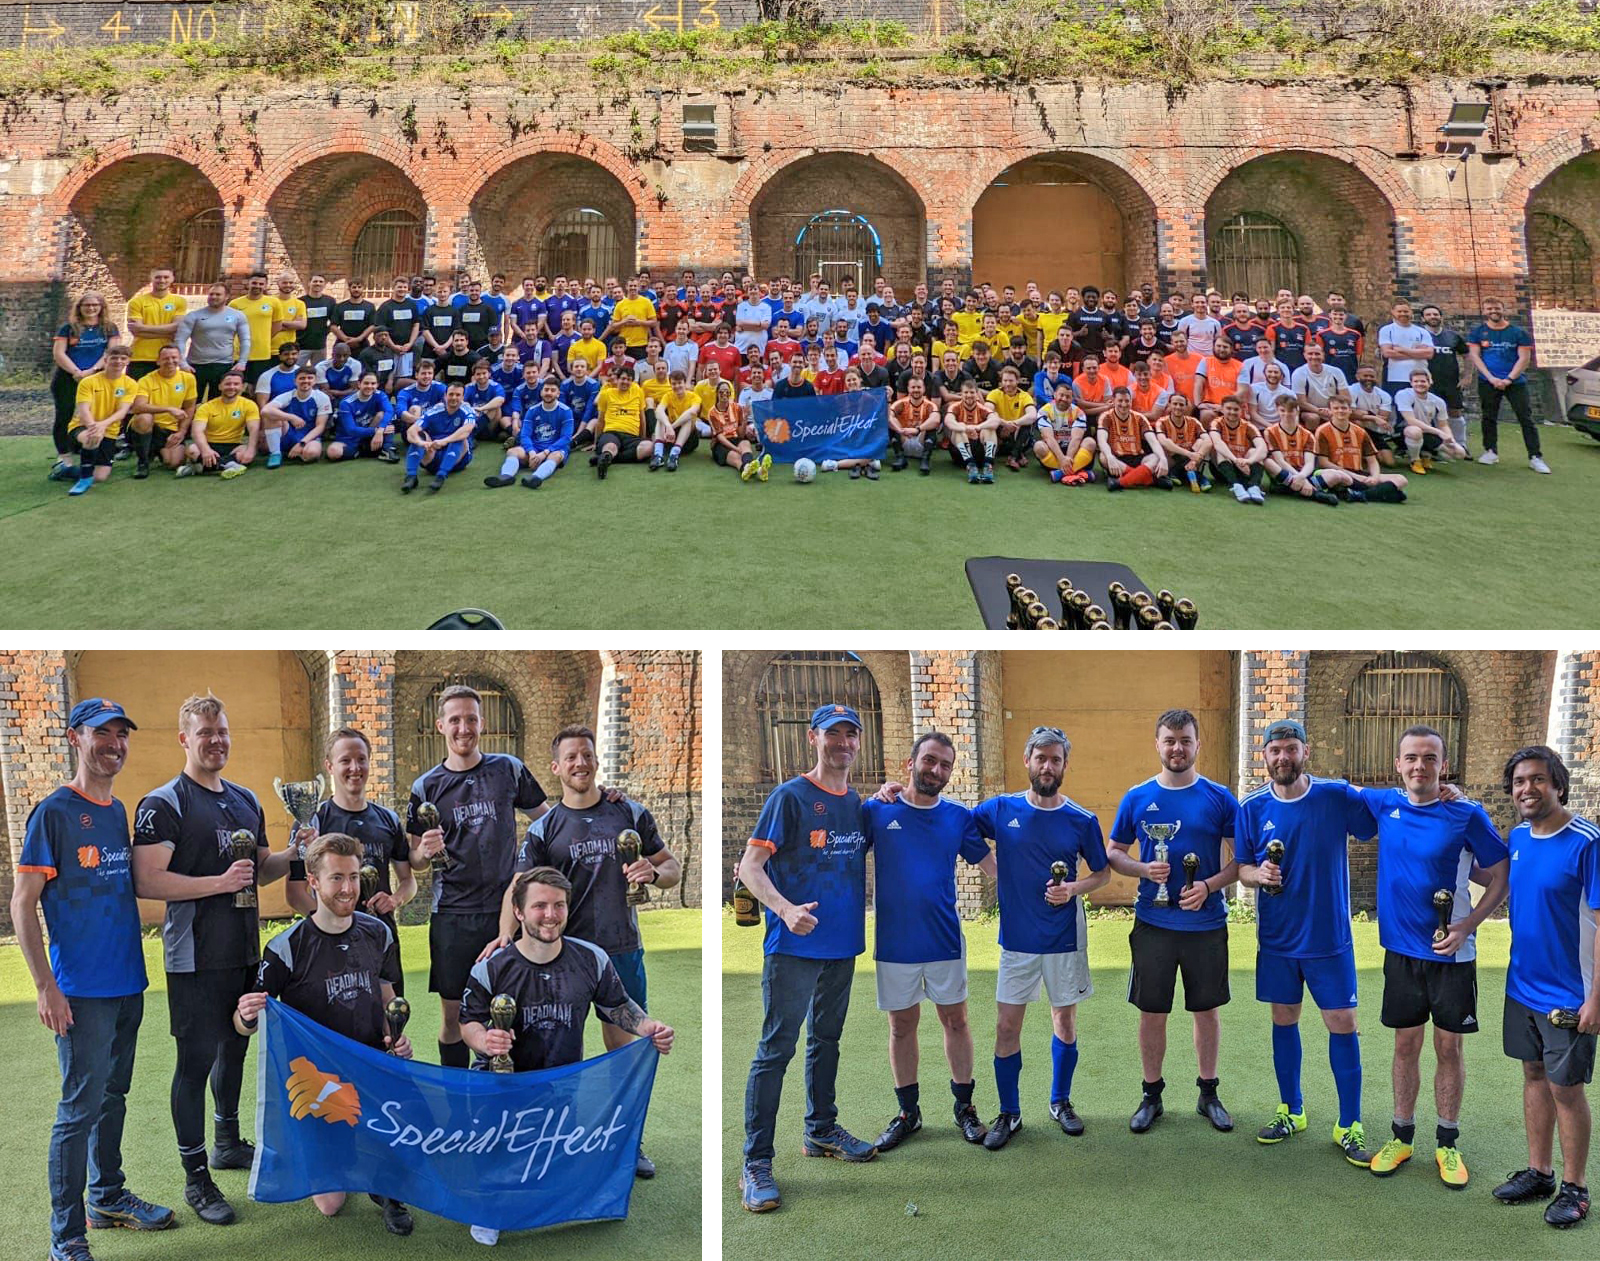 Three images: all the teams together, the winning team of five holding a trophy and a charity flag, a second team of five hold a trophy